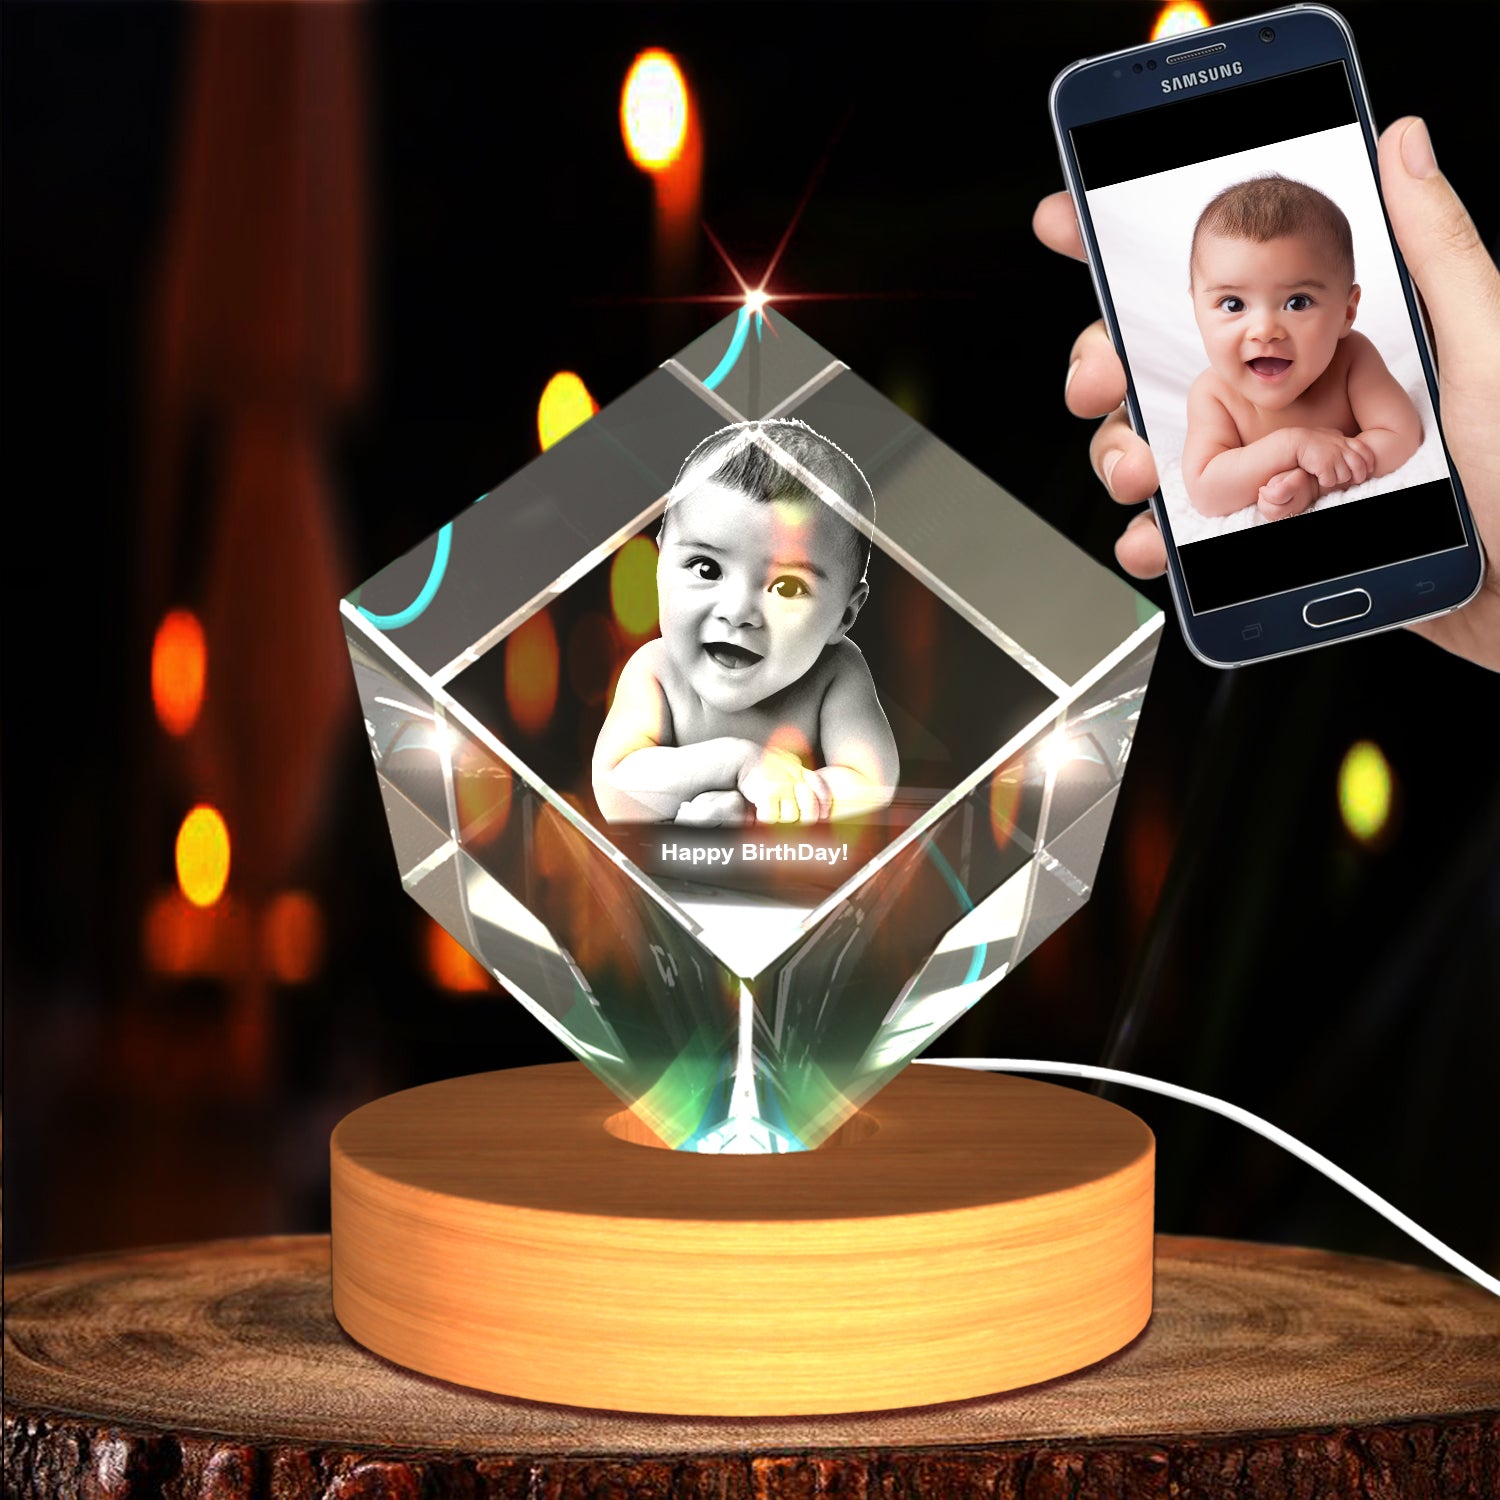 Personalized 3D Crystal Photo Gifts - Made in Canada Diamond Medium A&B Crystal Collection